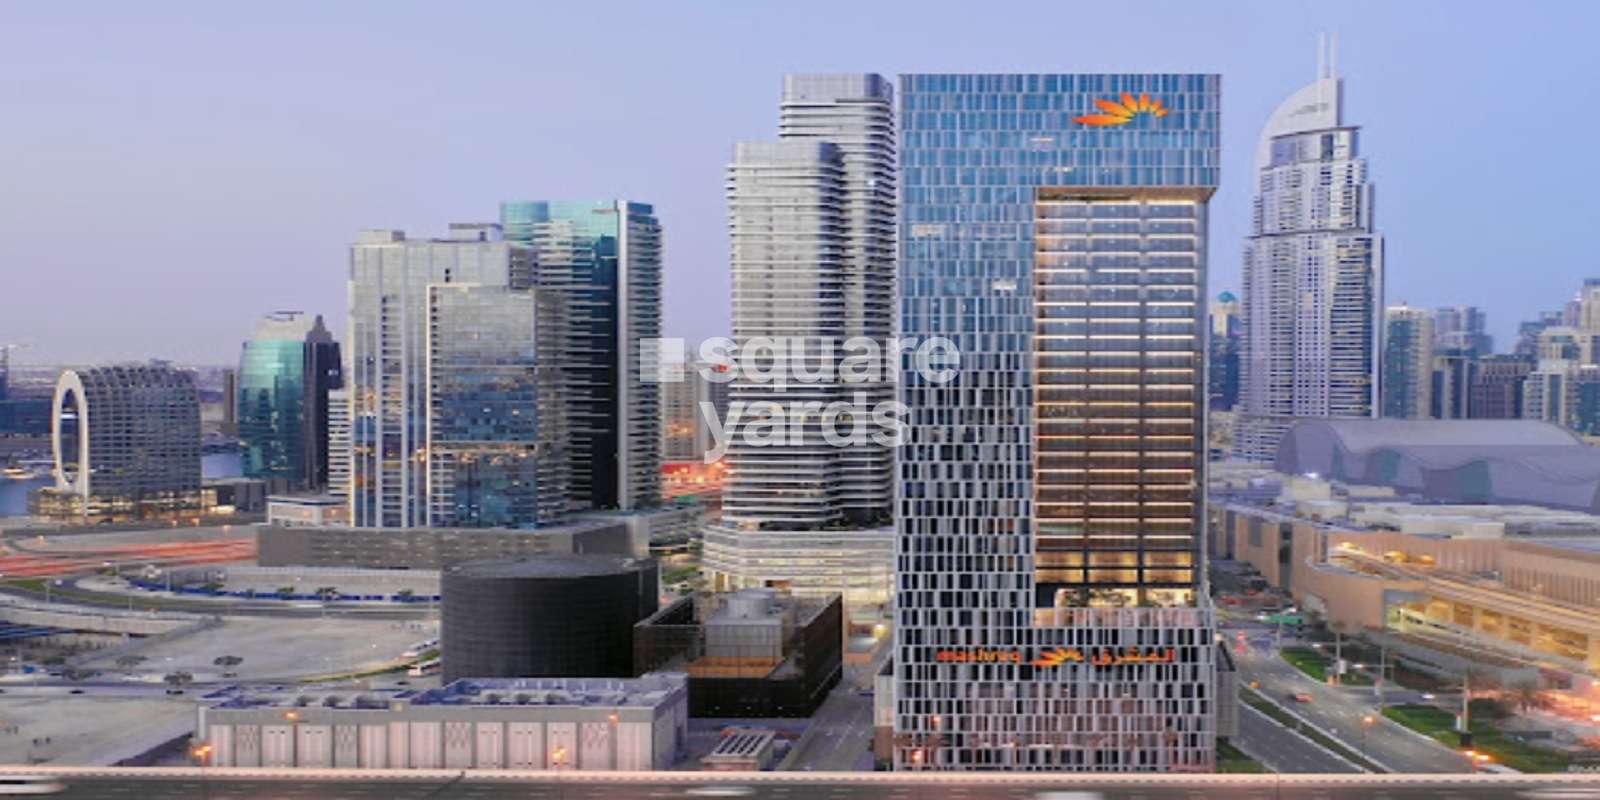 Mashreq Bank Office Tower Cover Image